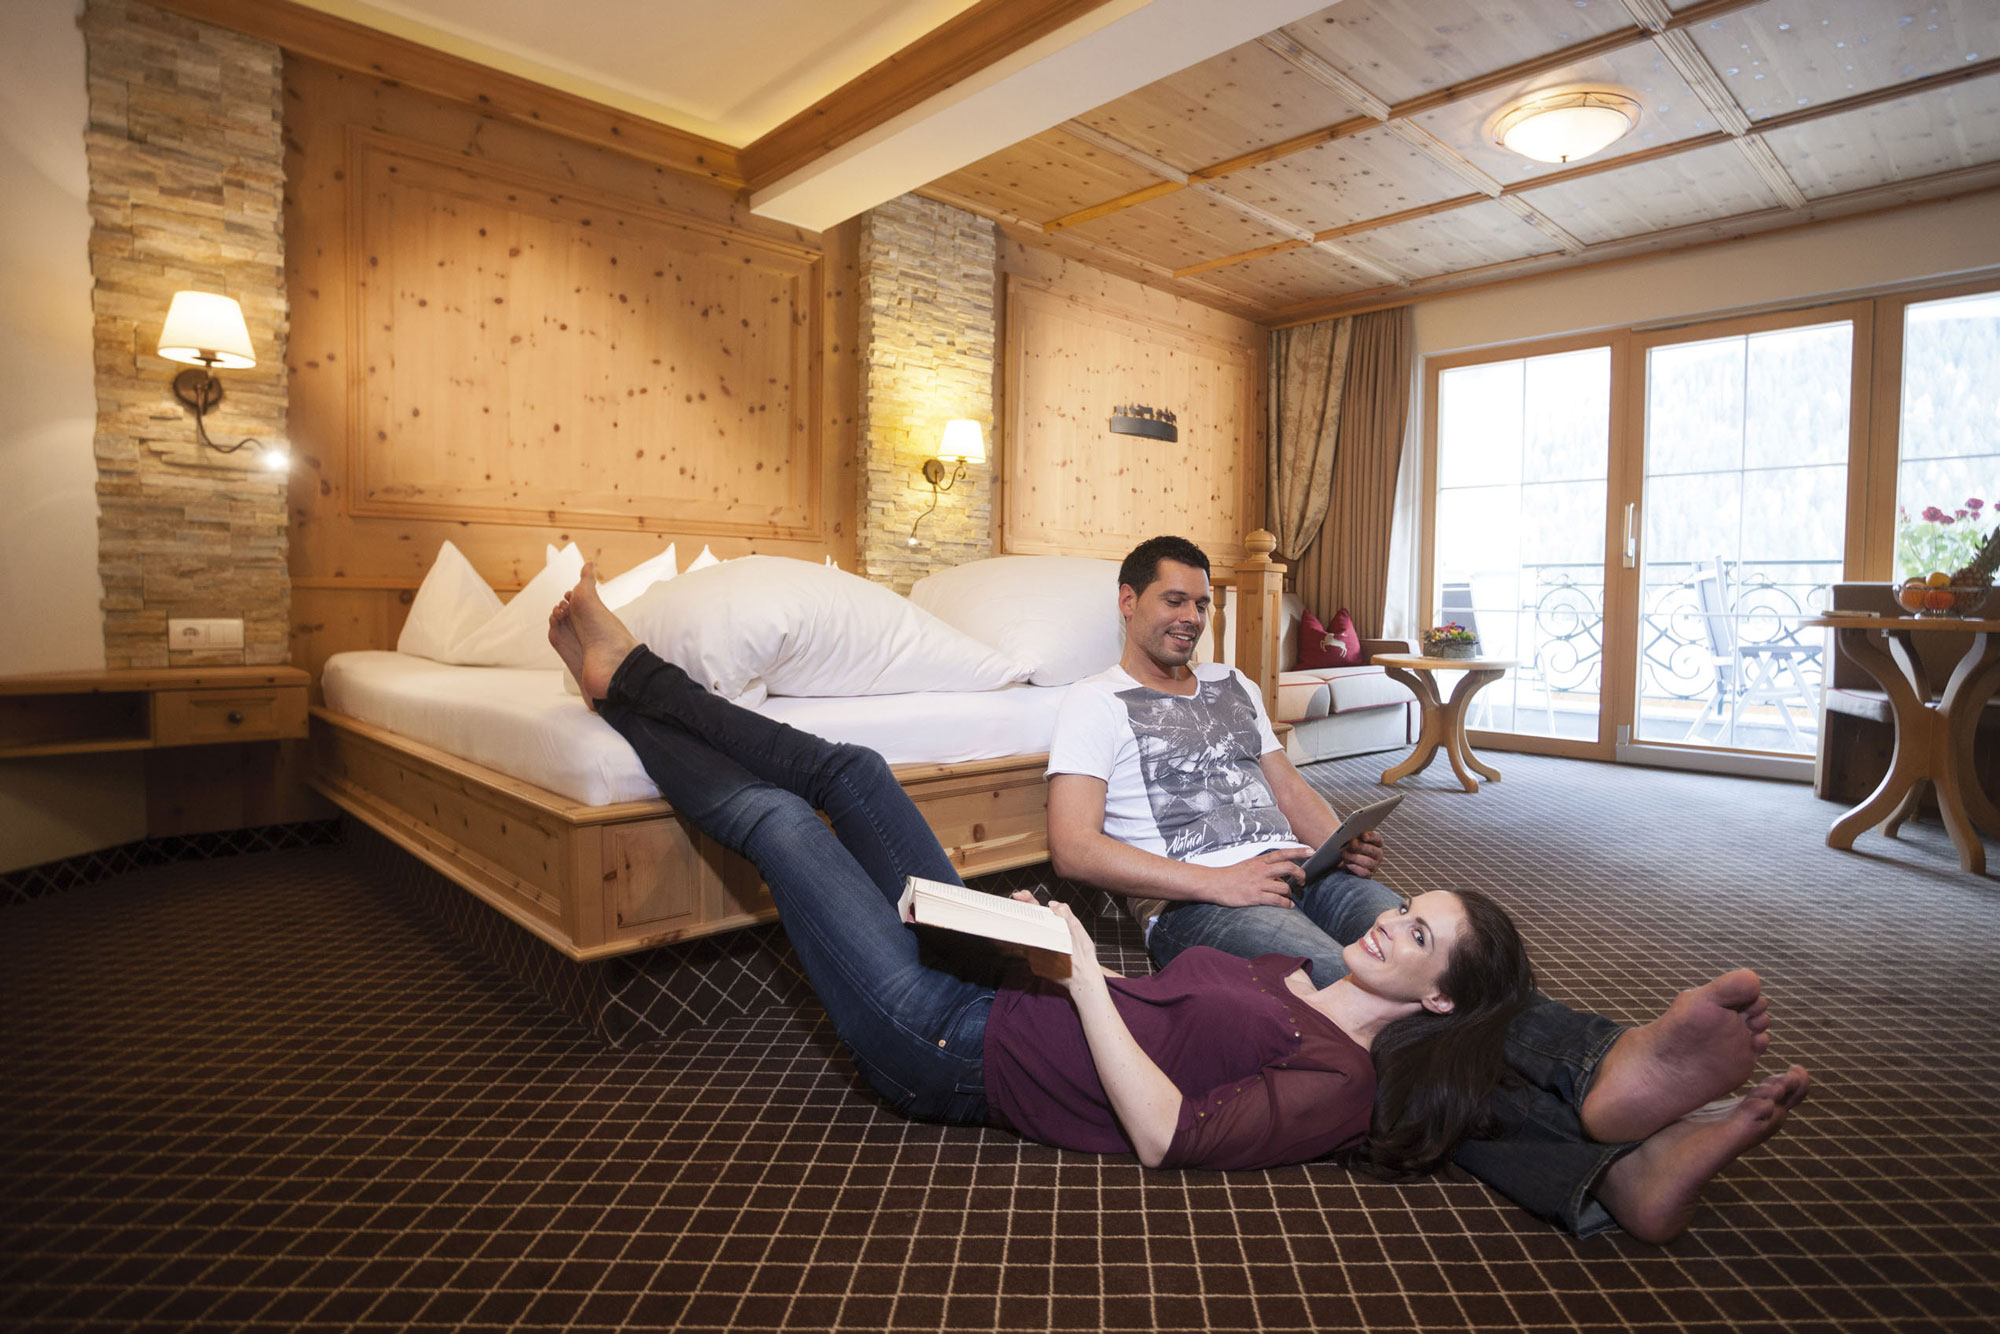 Relaxing holidays at the Hotel Kindl in the Stubai Valley